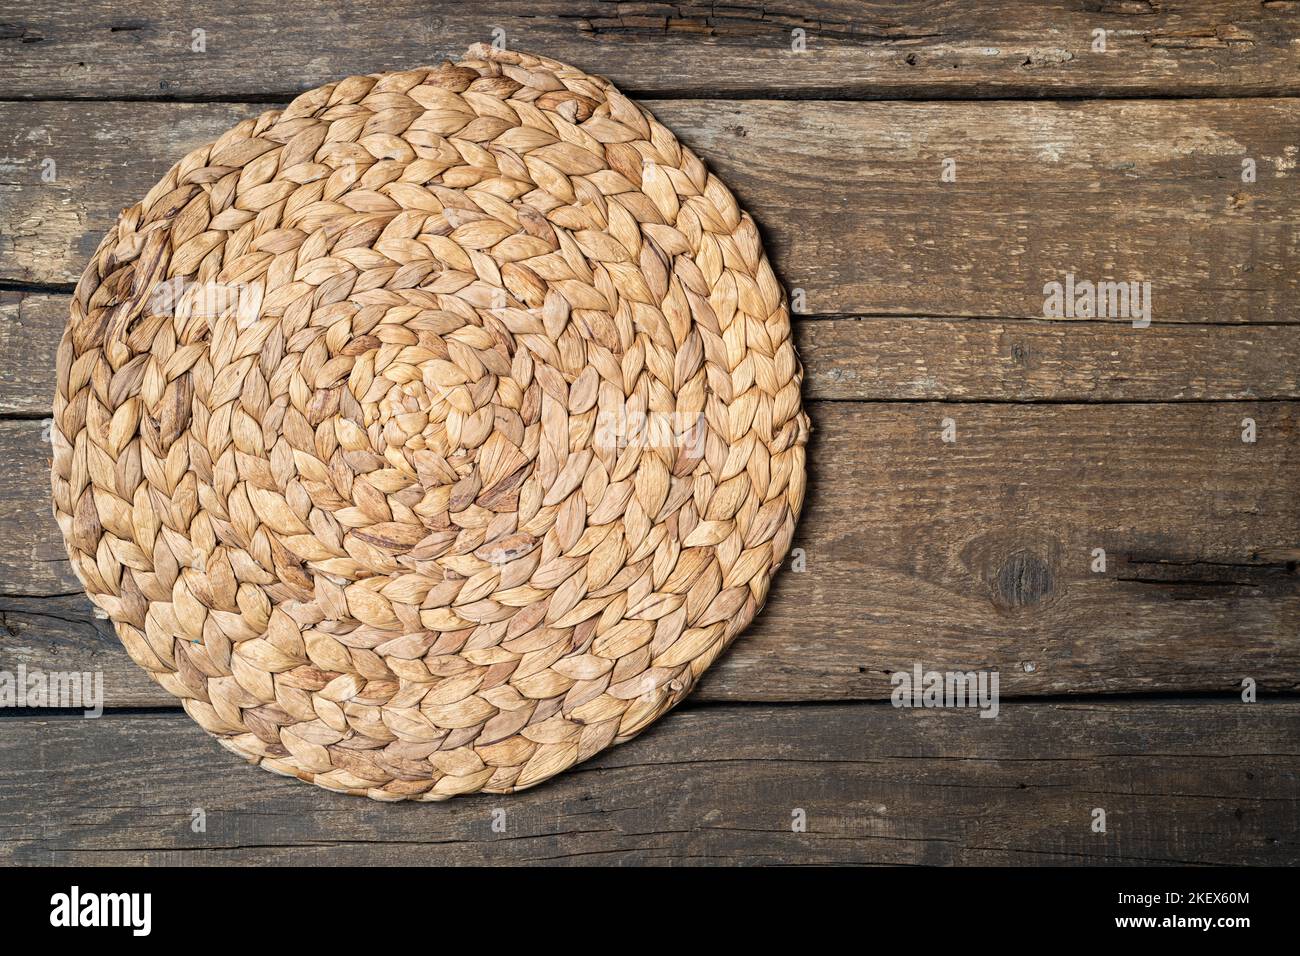 Wicker straw place mat on wooden dark background. Round woven straw mat on wooden gray dining table. Menu, dining, eating concept. Top view, copy spac Stock Photo